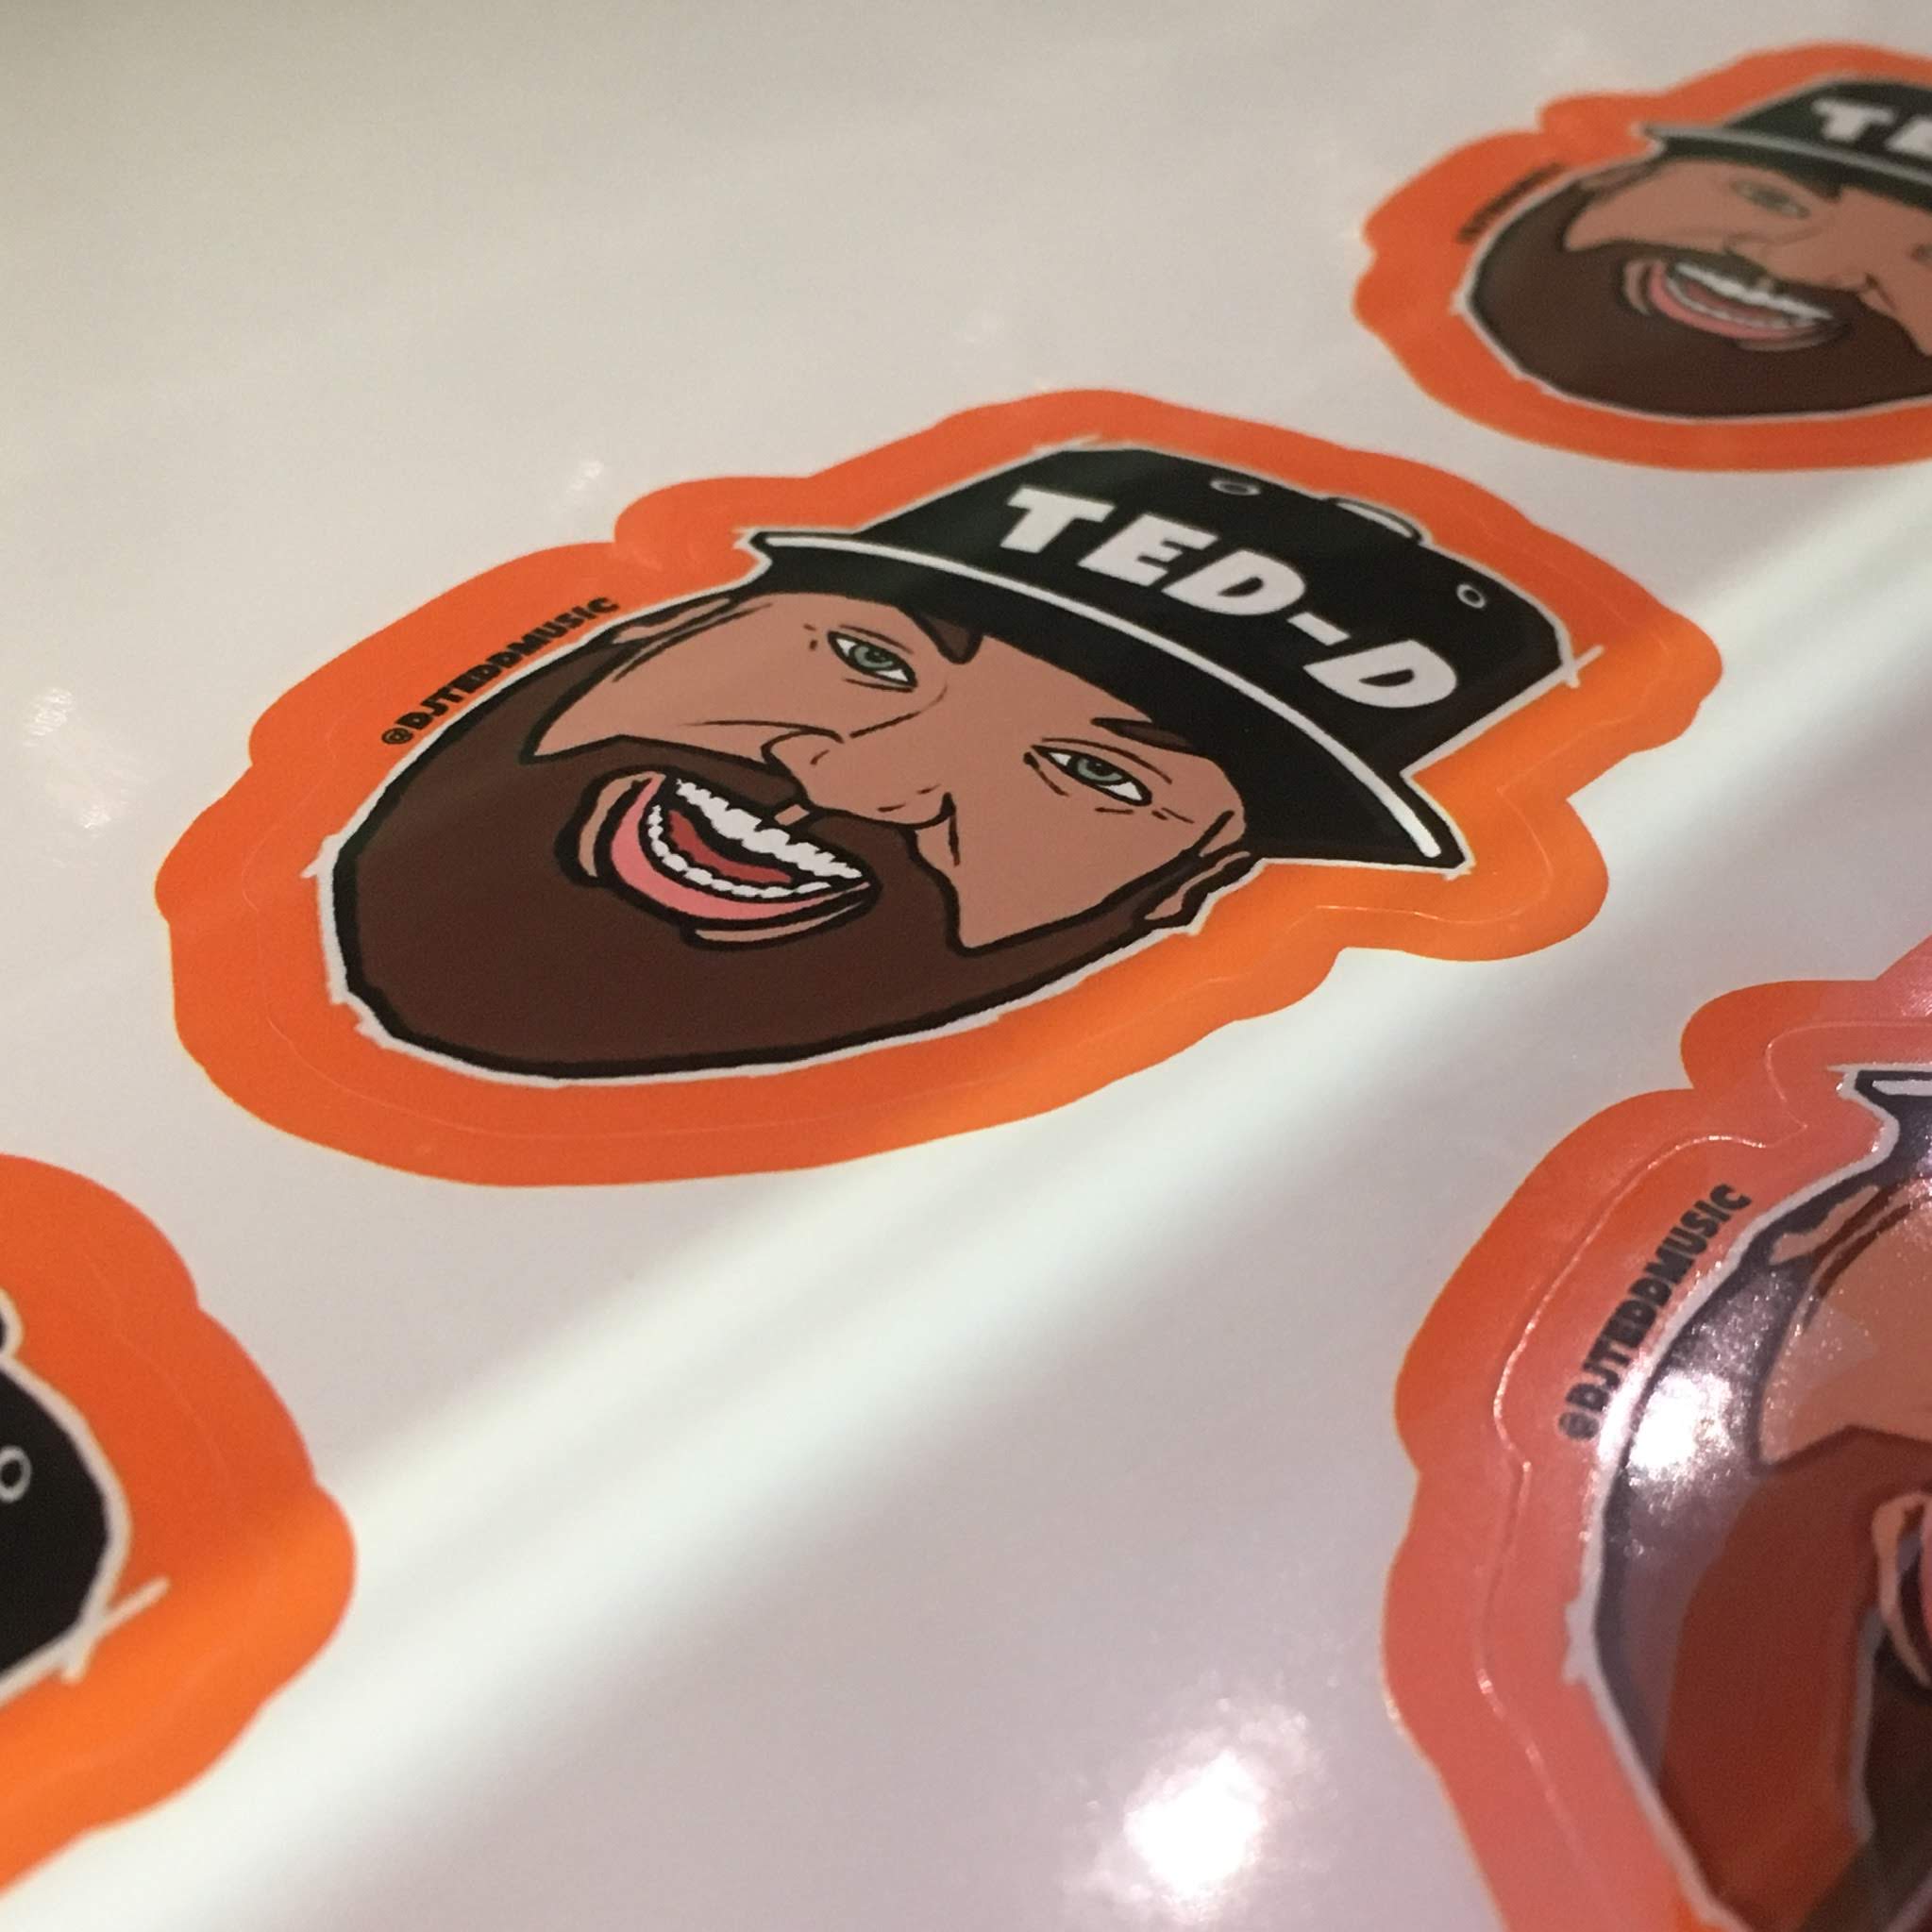 50 Custom Die Cut Clear Vinyl Stickers Pack. Your Custom Vinyl Sticker or  Decal Cut to Any Shape. We Make Stickers From Your Pictures. -  Canada